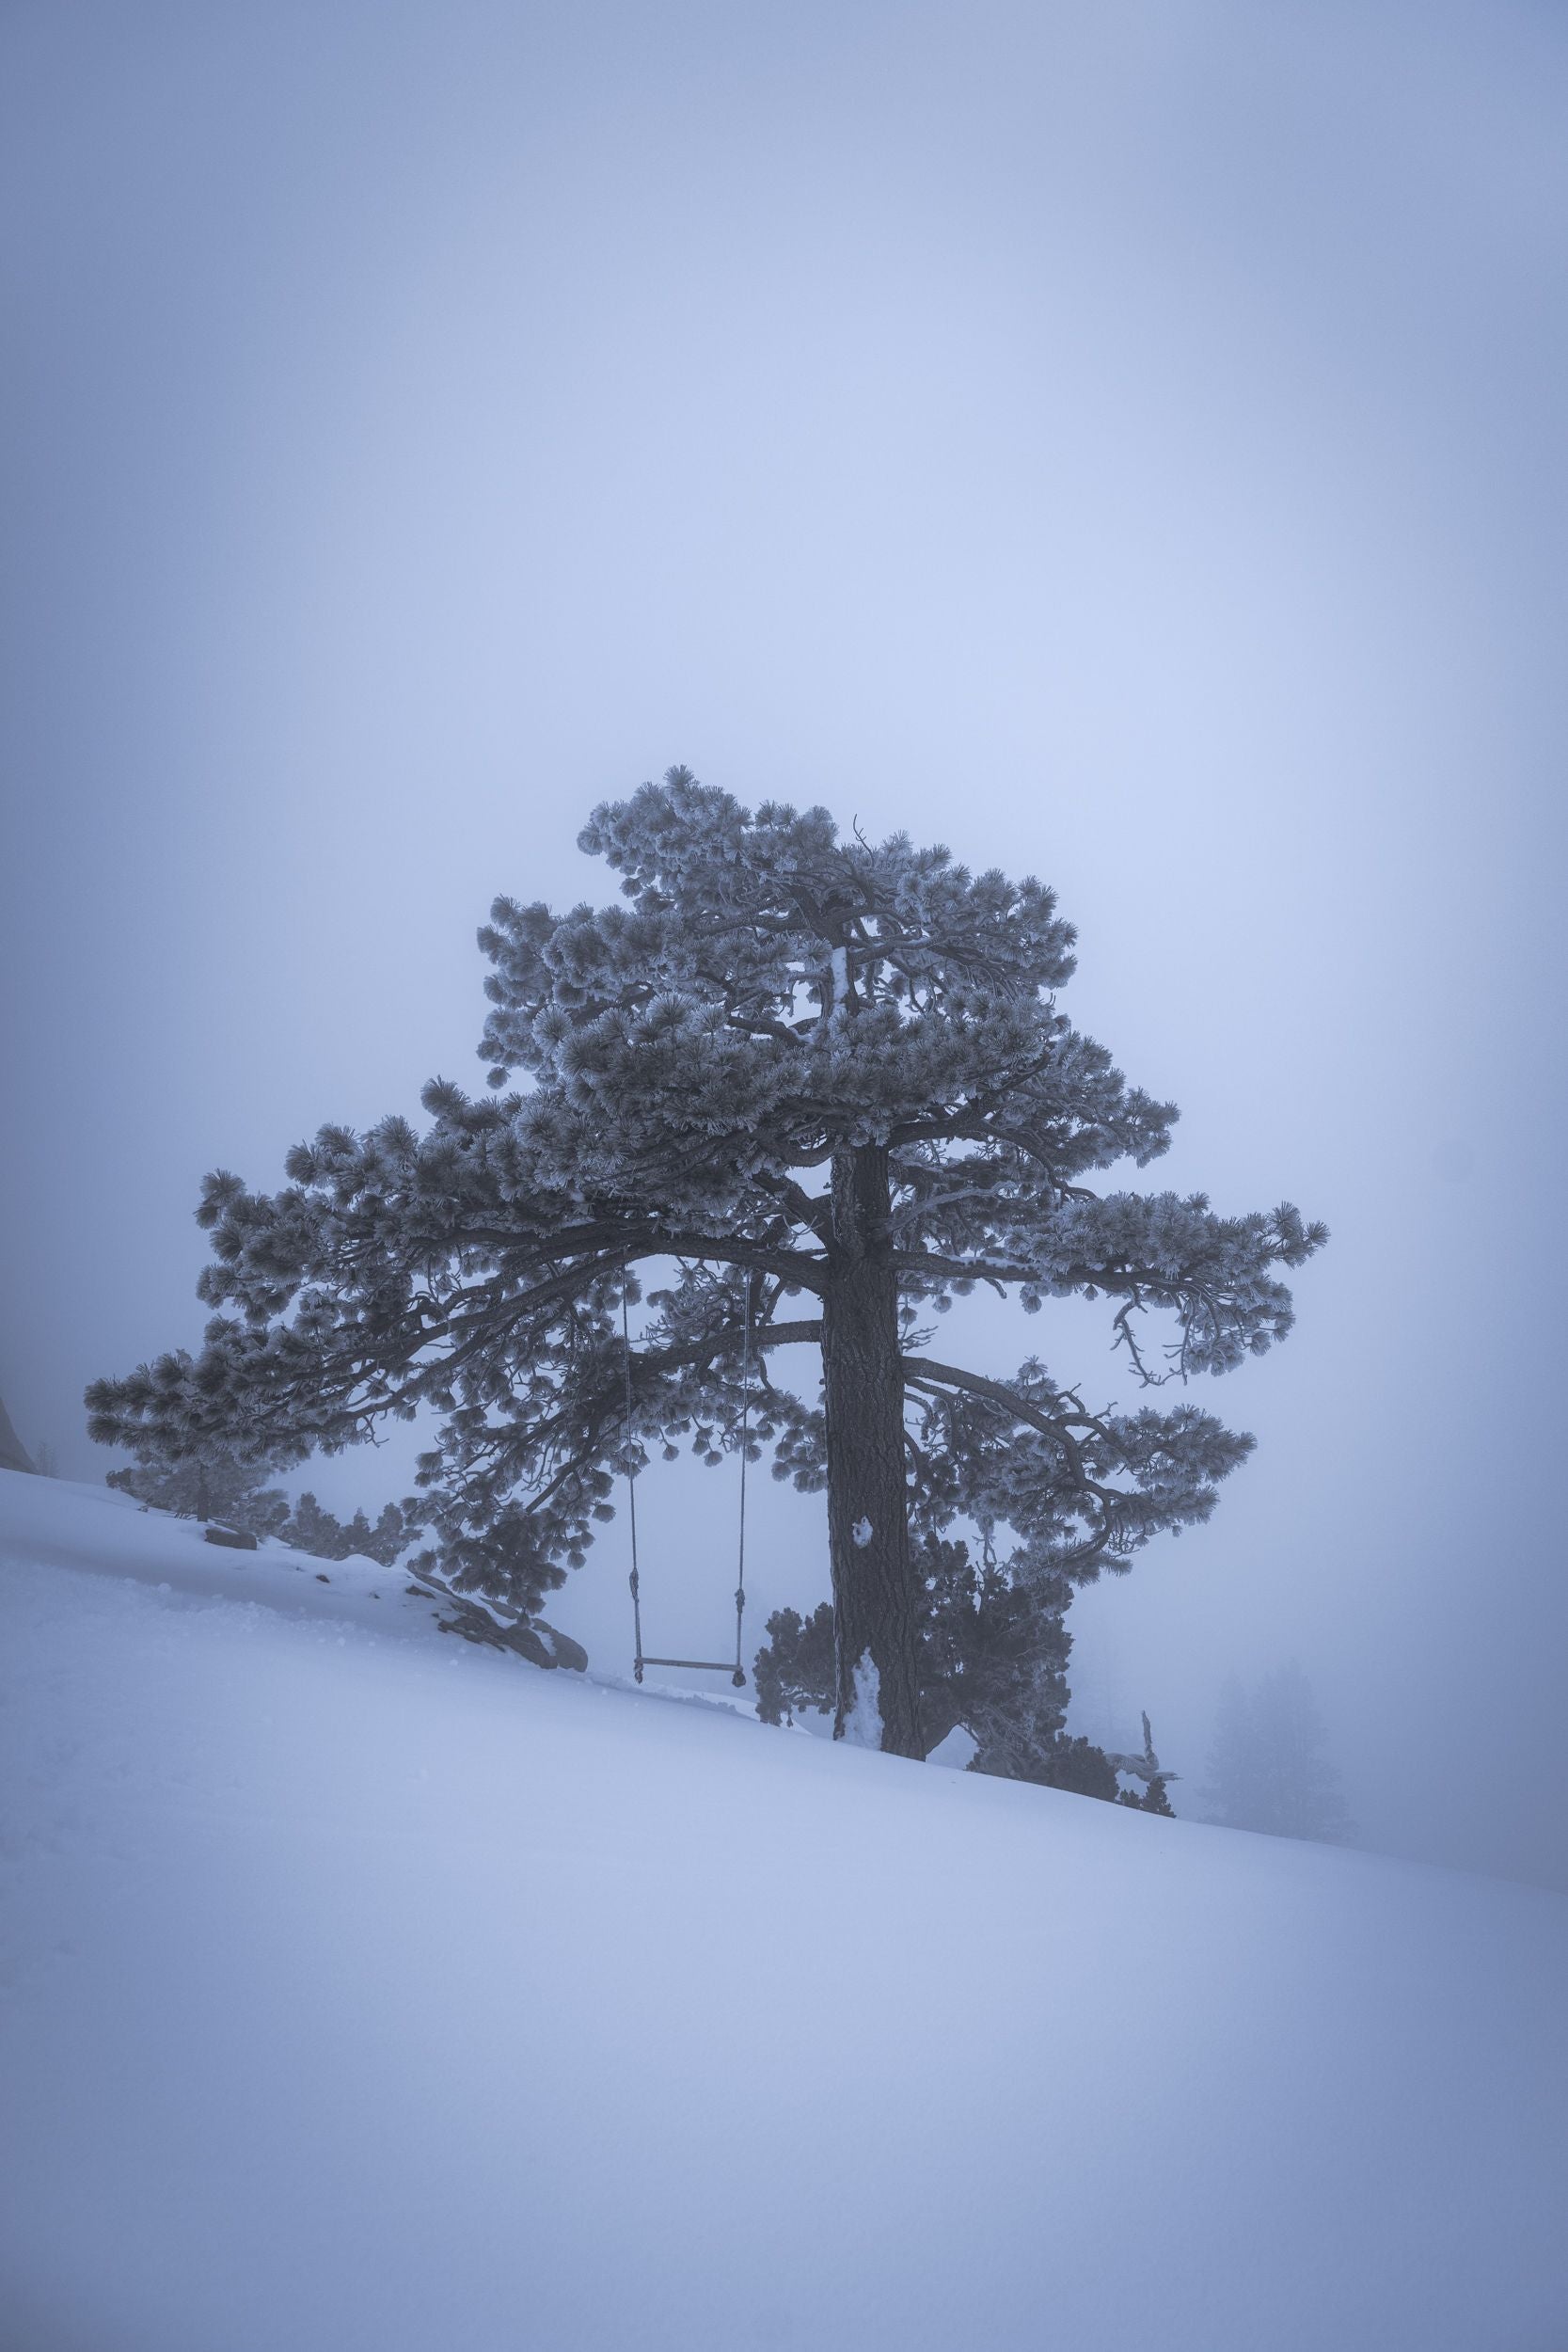 A single trees coated in frost sits on a snowy ground surrounded by fog.